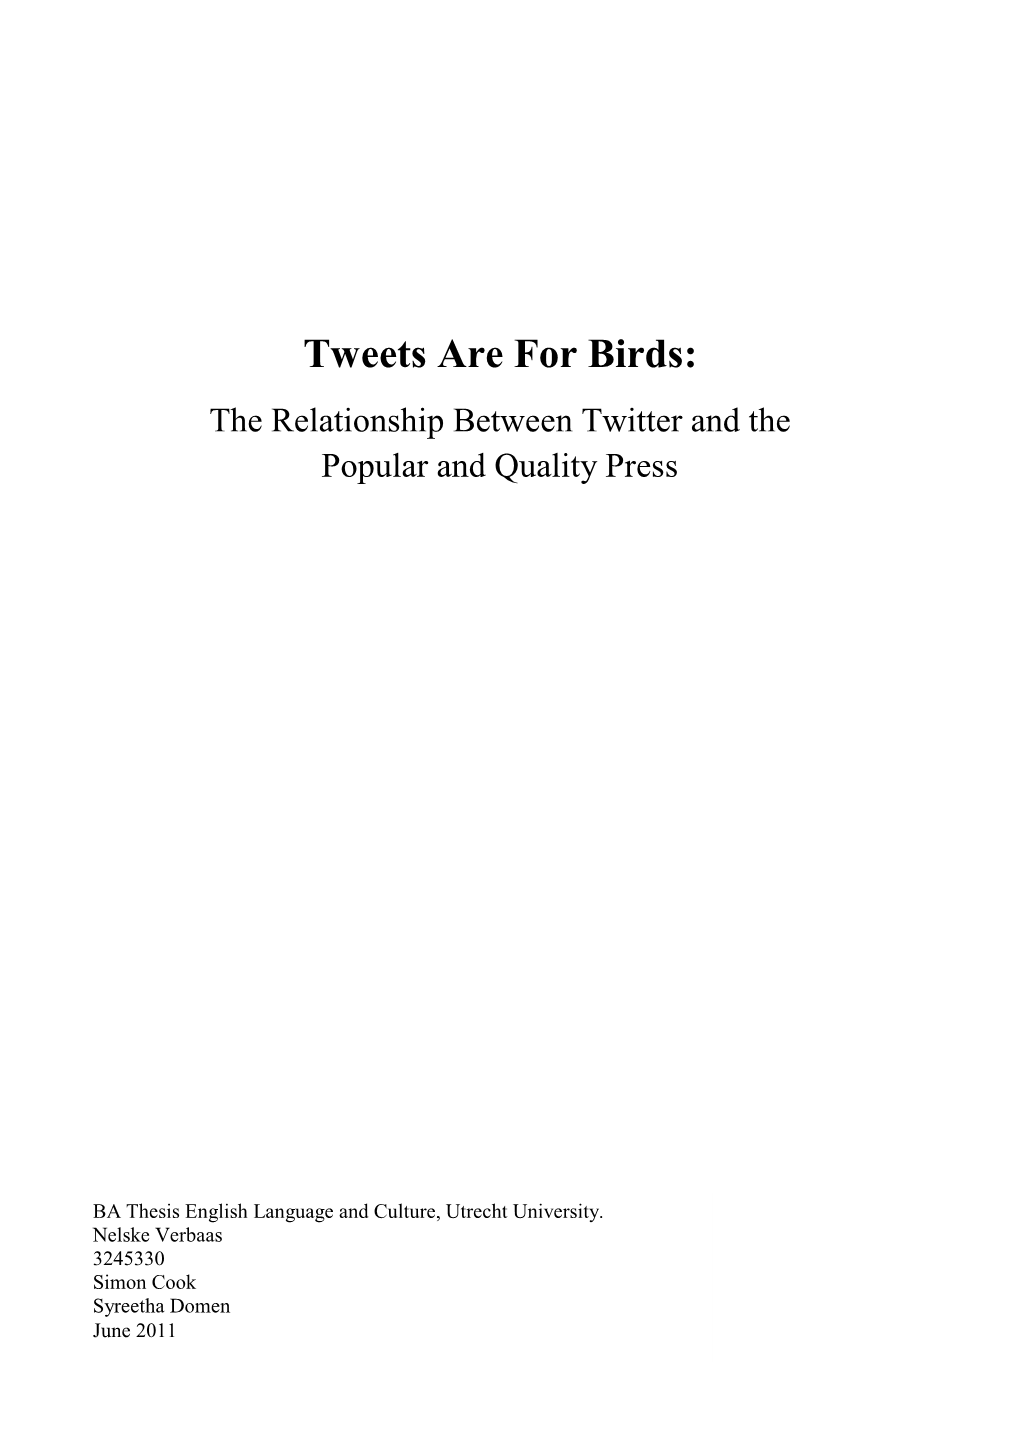 Tweets Are for Birds: the Relationship Between Twitter and the Popular and Quality Press